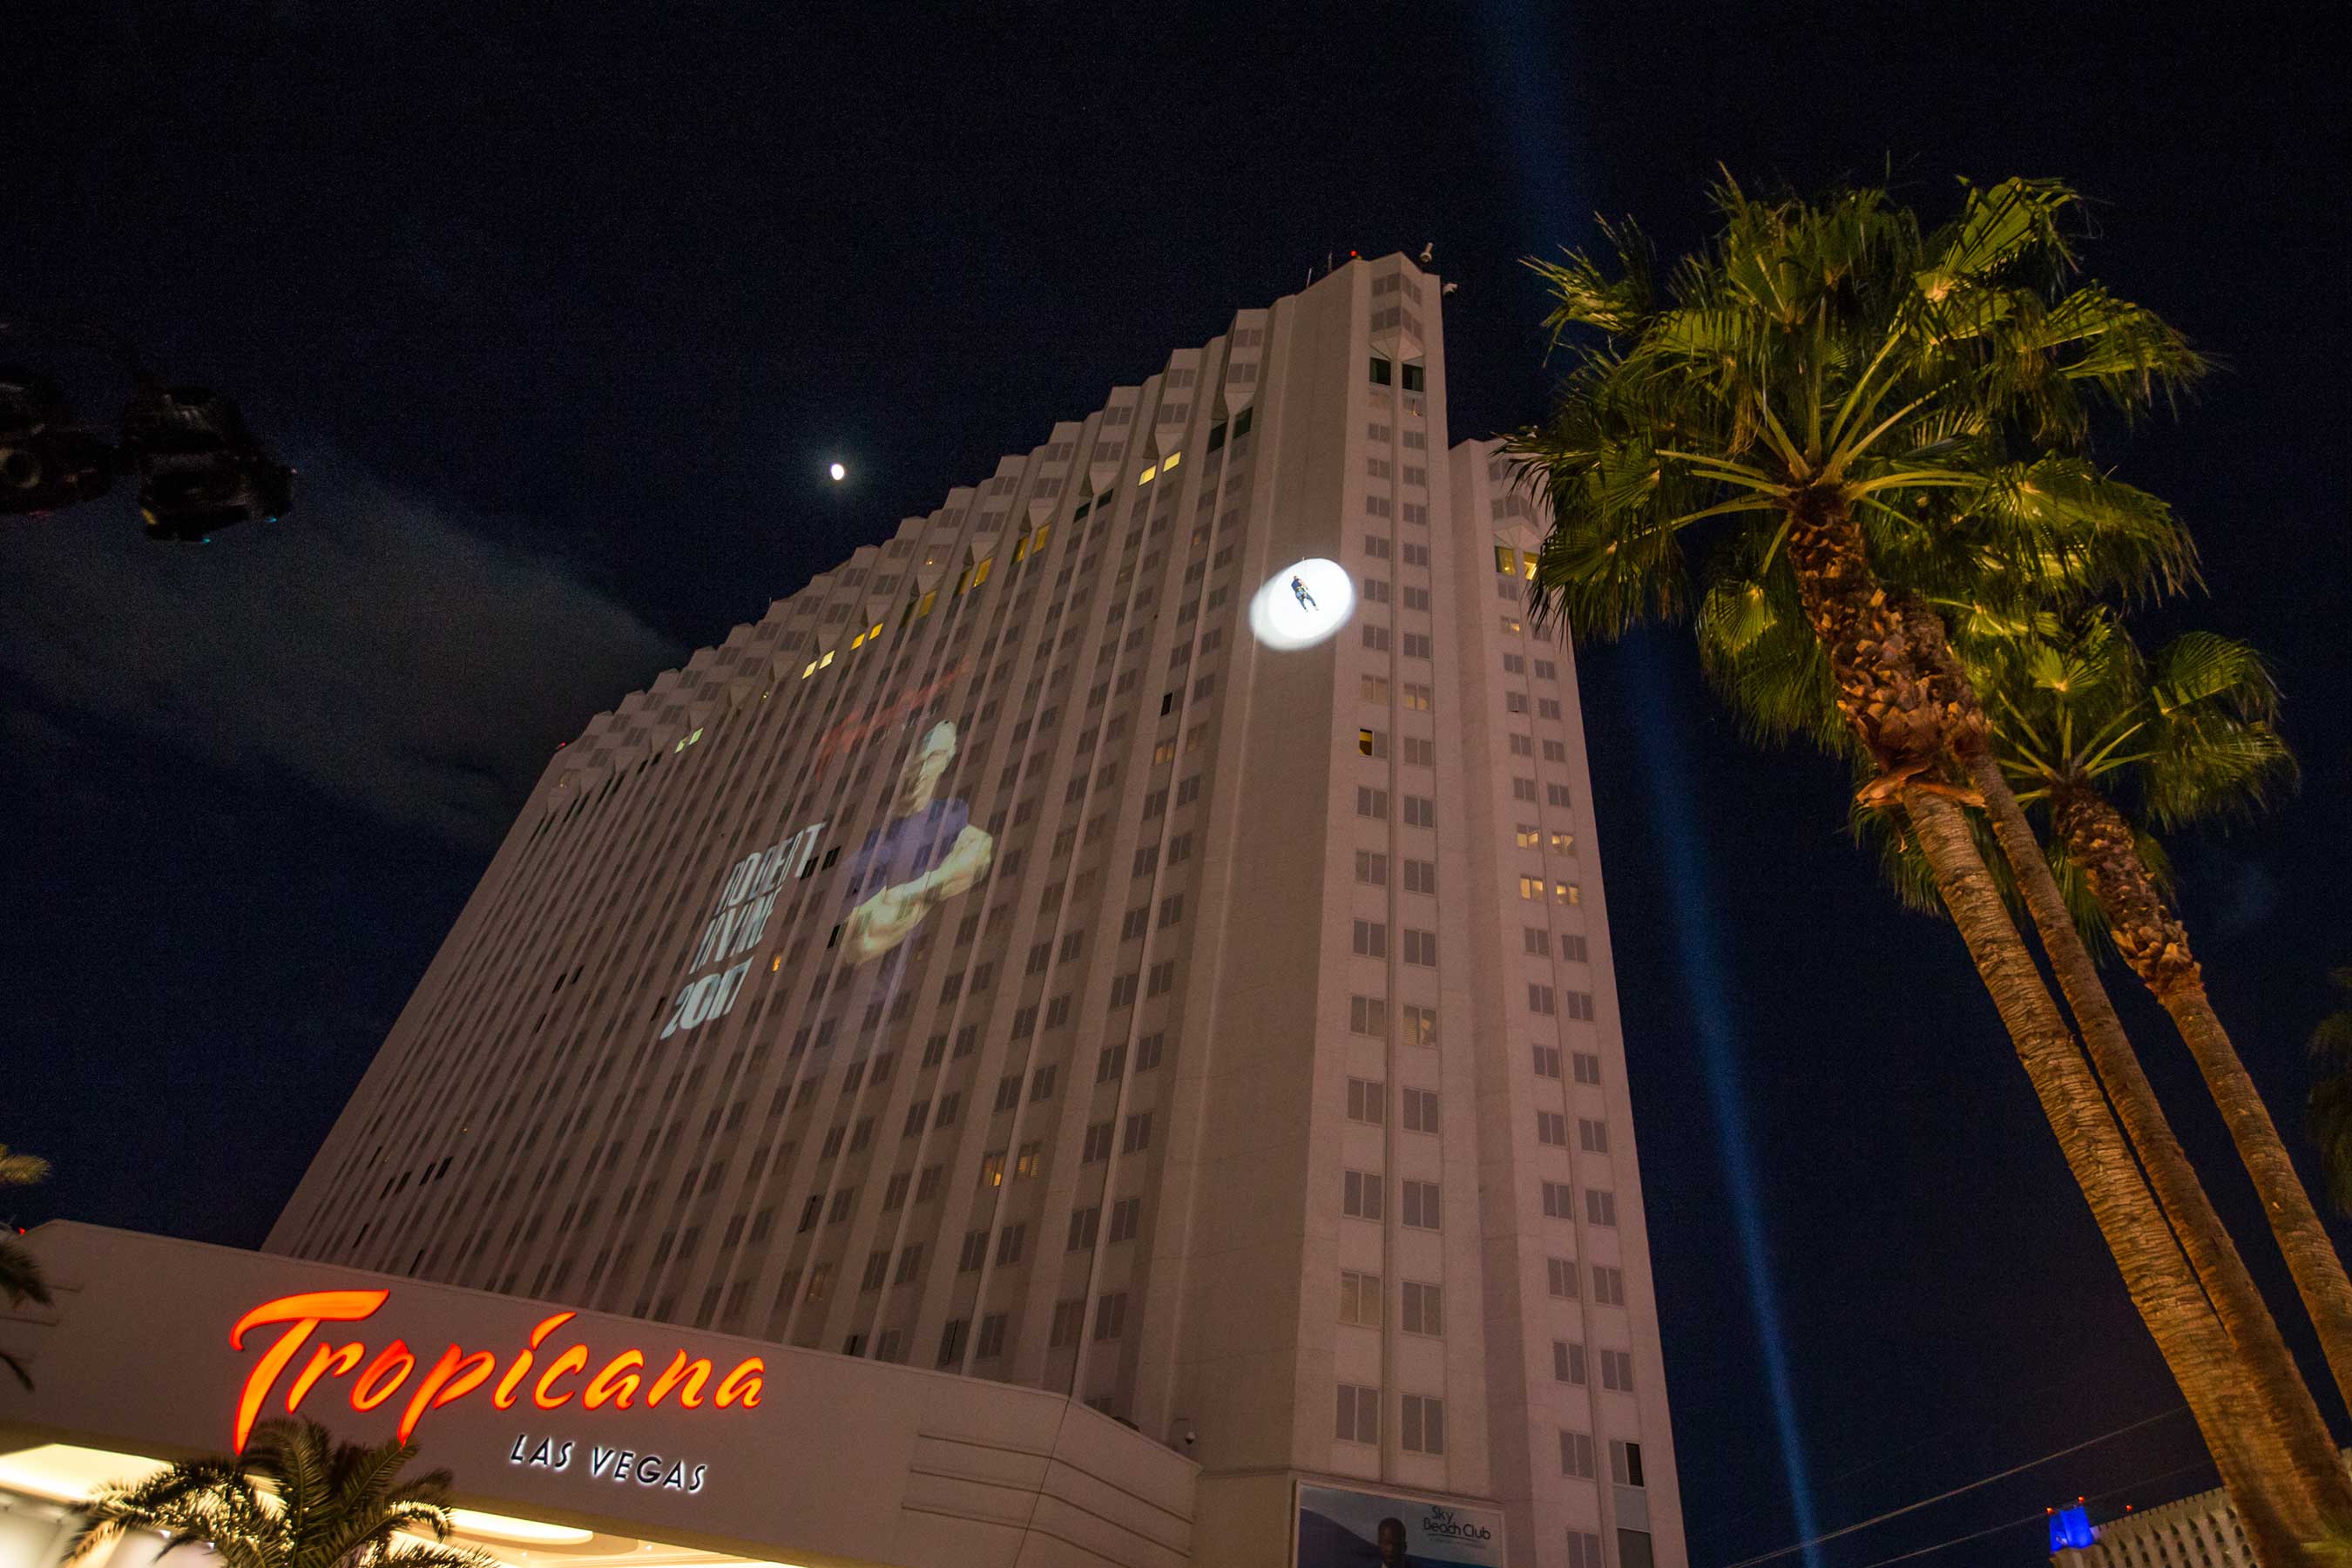 Chef Irvine rappels 22 stories (220 feet) down the exterior of the Tropicana hotel Credit: Erik Kabik Photography/ MediaPunch